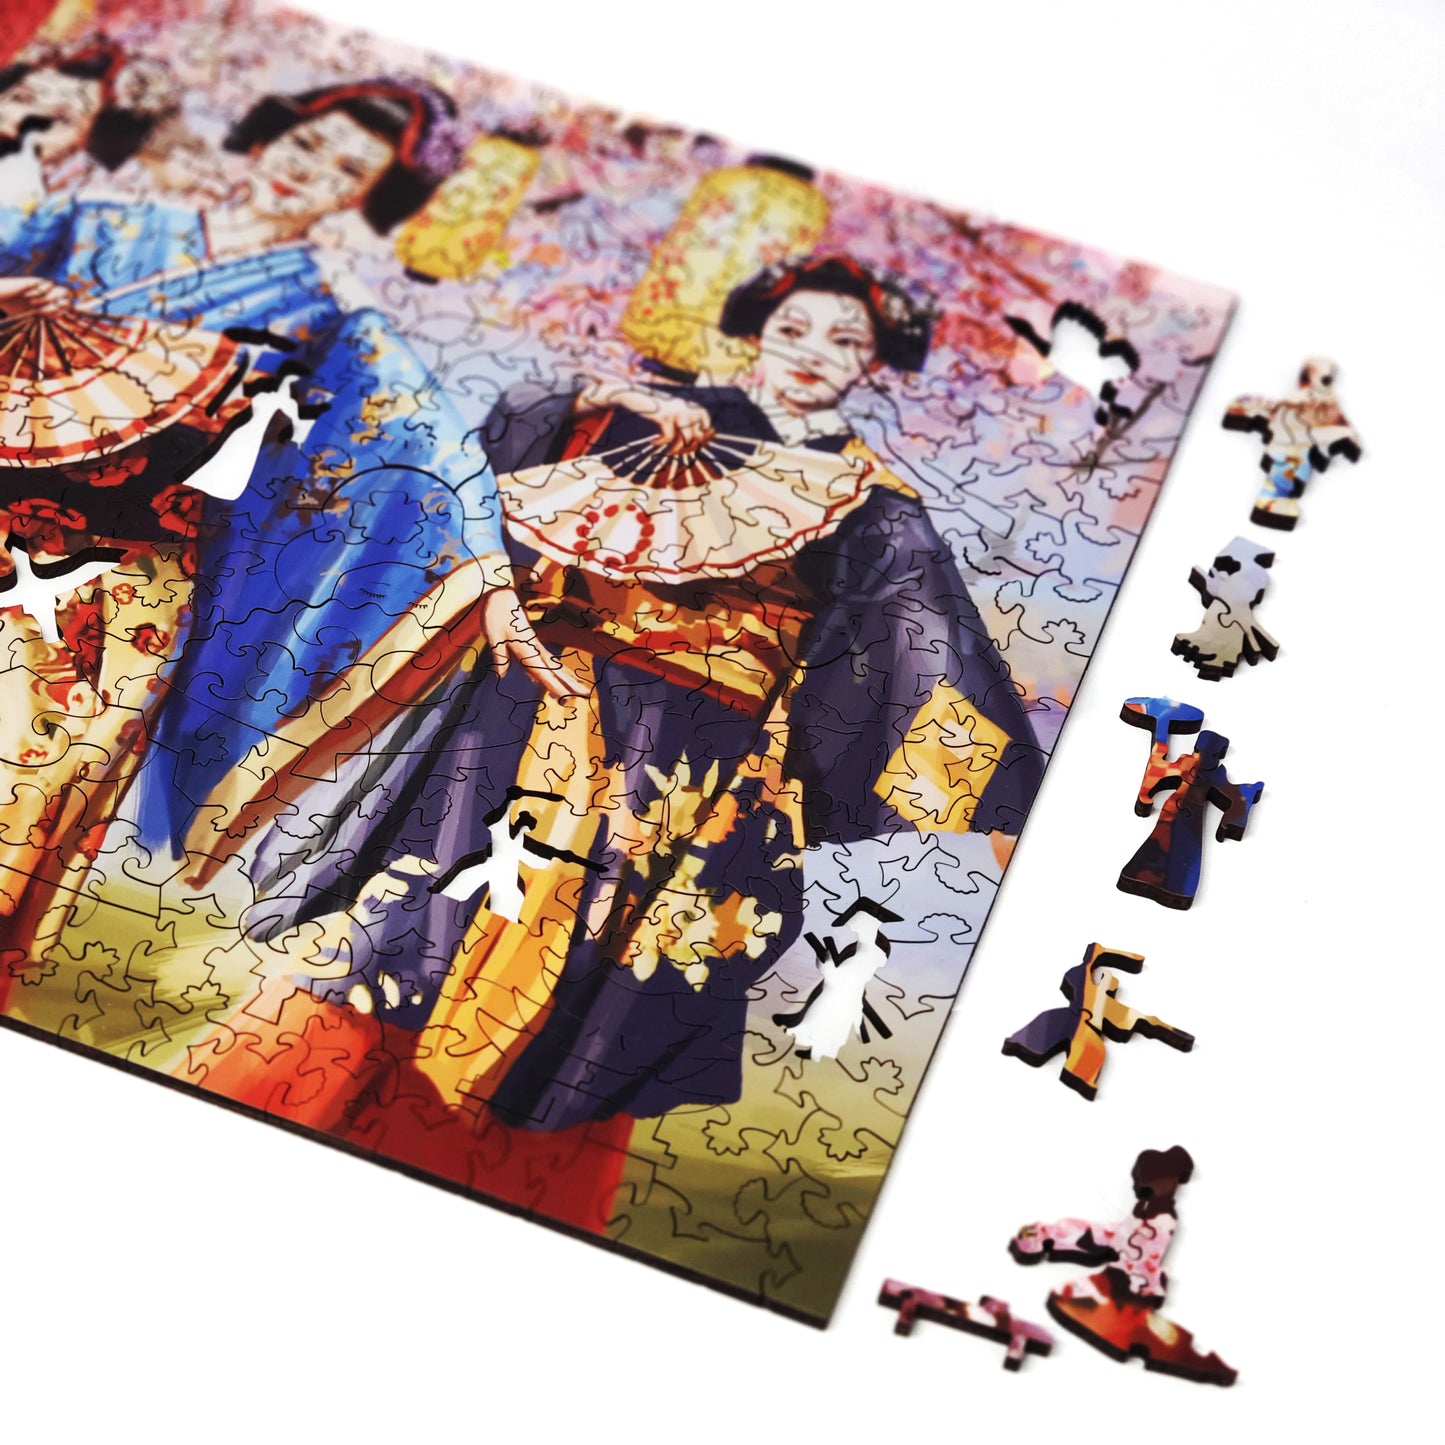 Wooden Jigsaw Puzzle with Uniquely Shaped Pieces for Adults - 437 Pieces - Sakura Blossom Festival